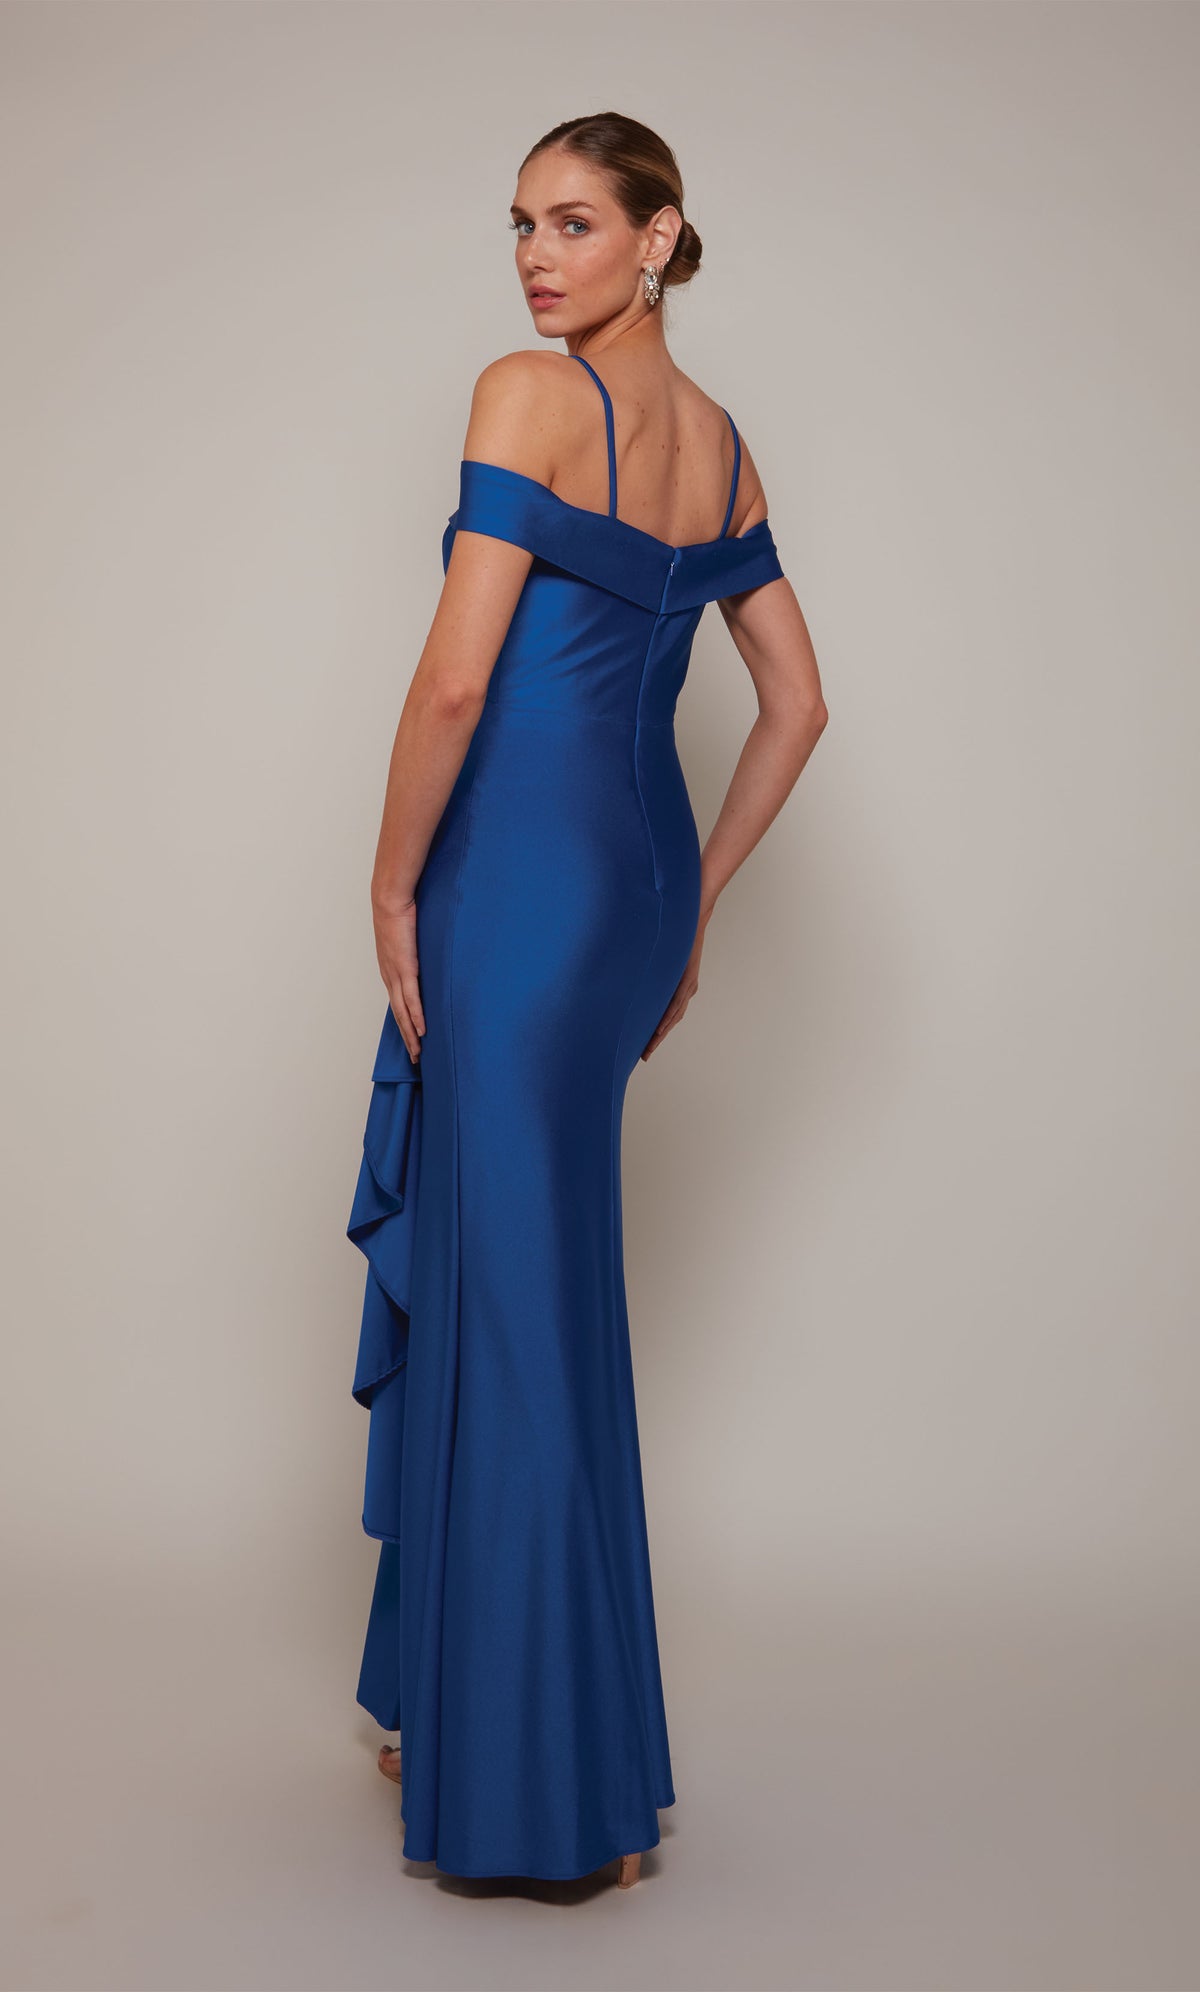 Royal blue off the shoulder long formal dress with spaghetti straps, a closed zip-up back, and a side ruffle.